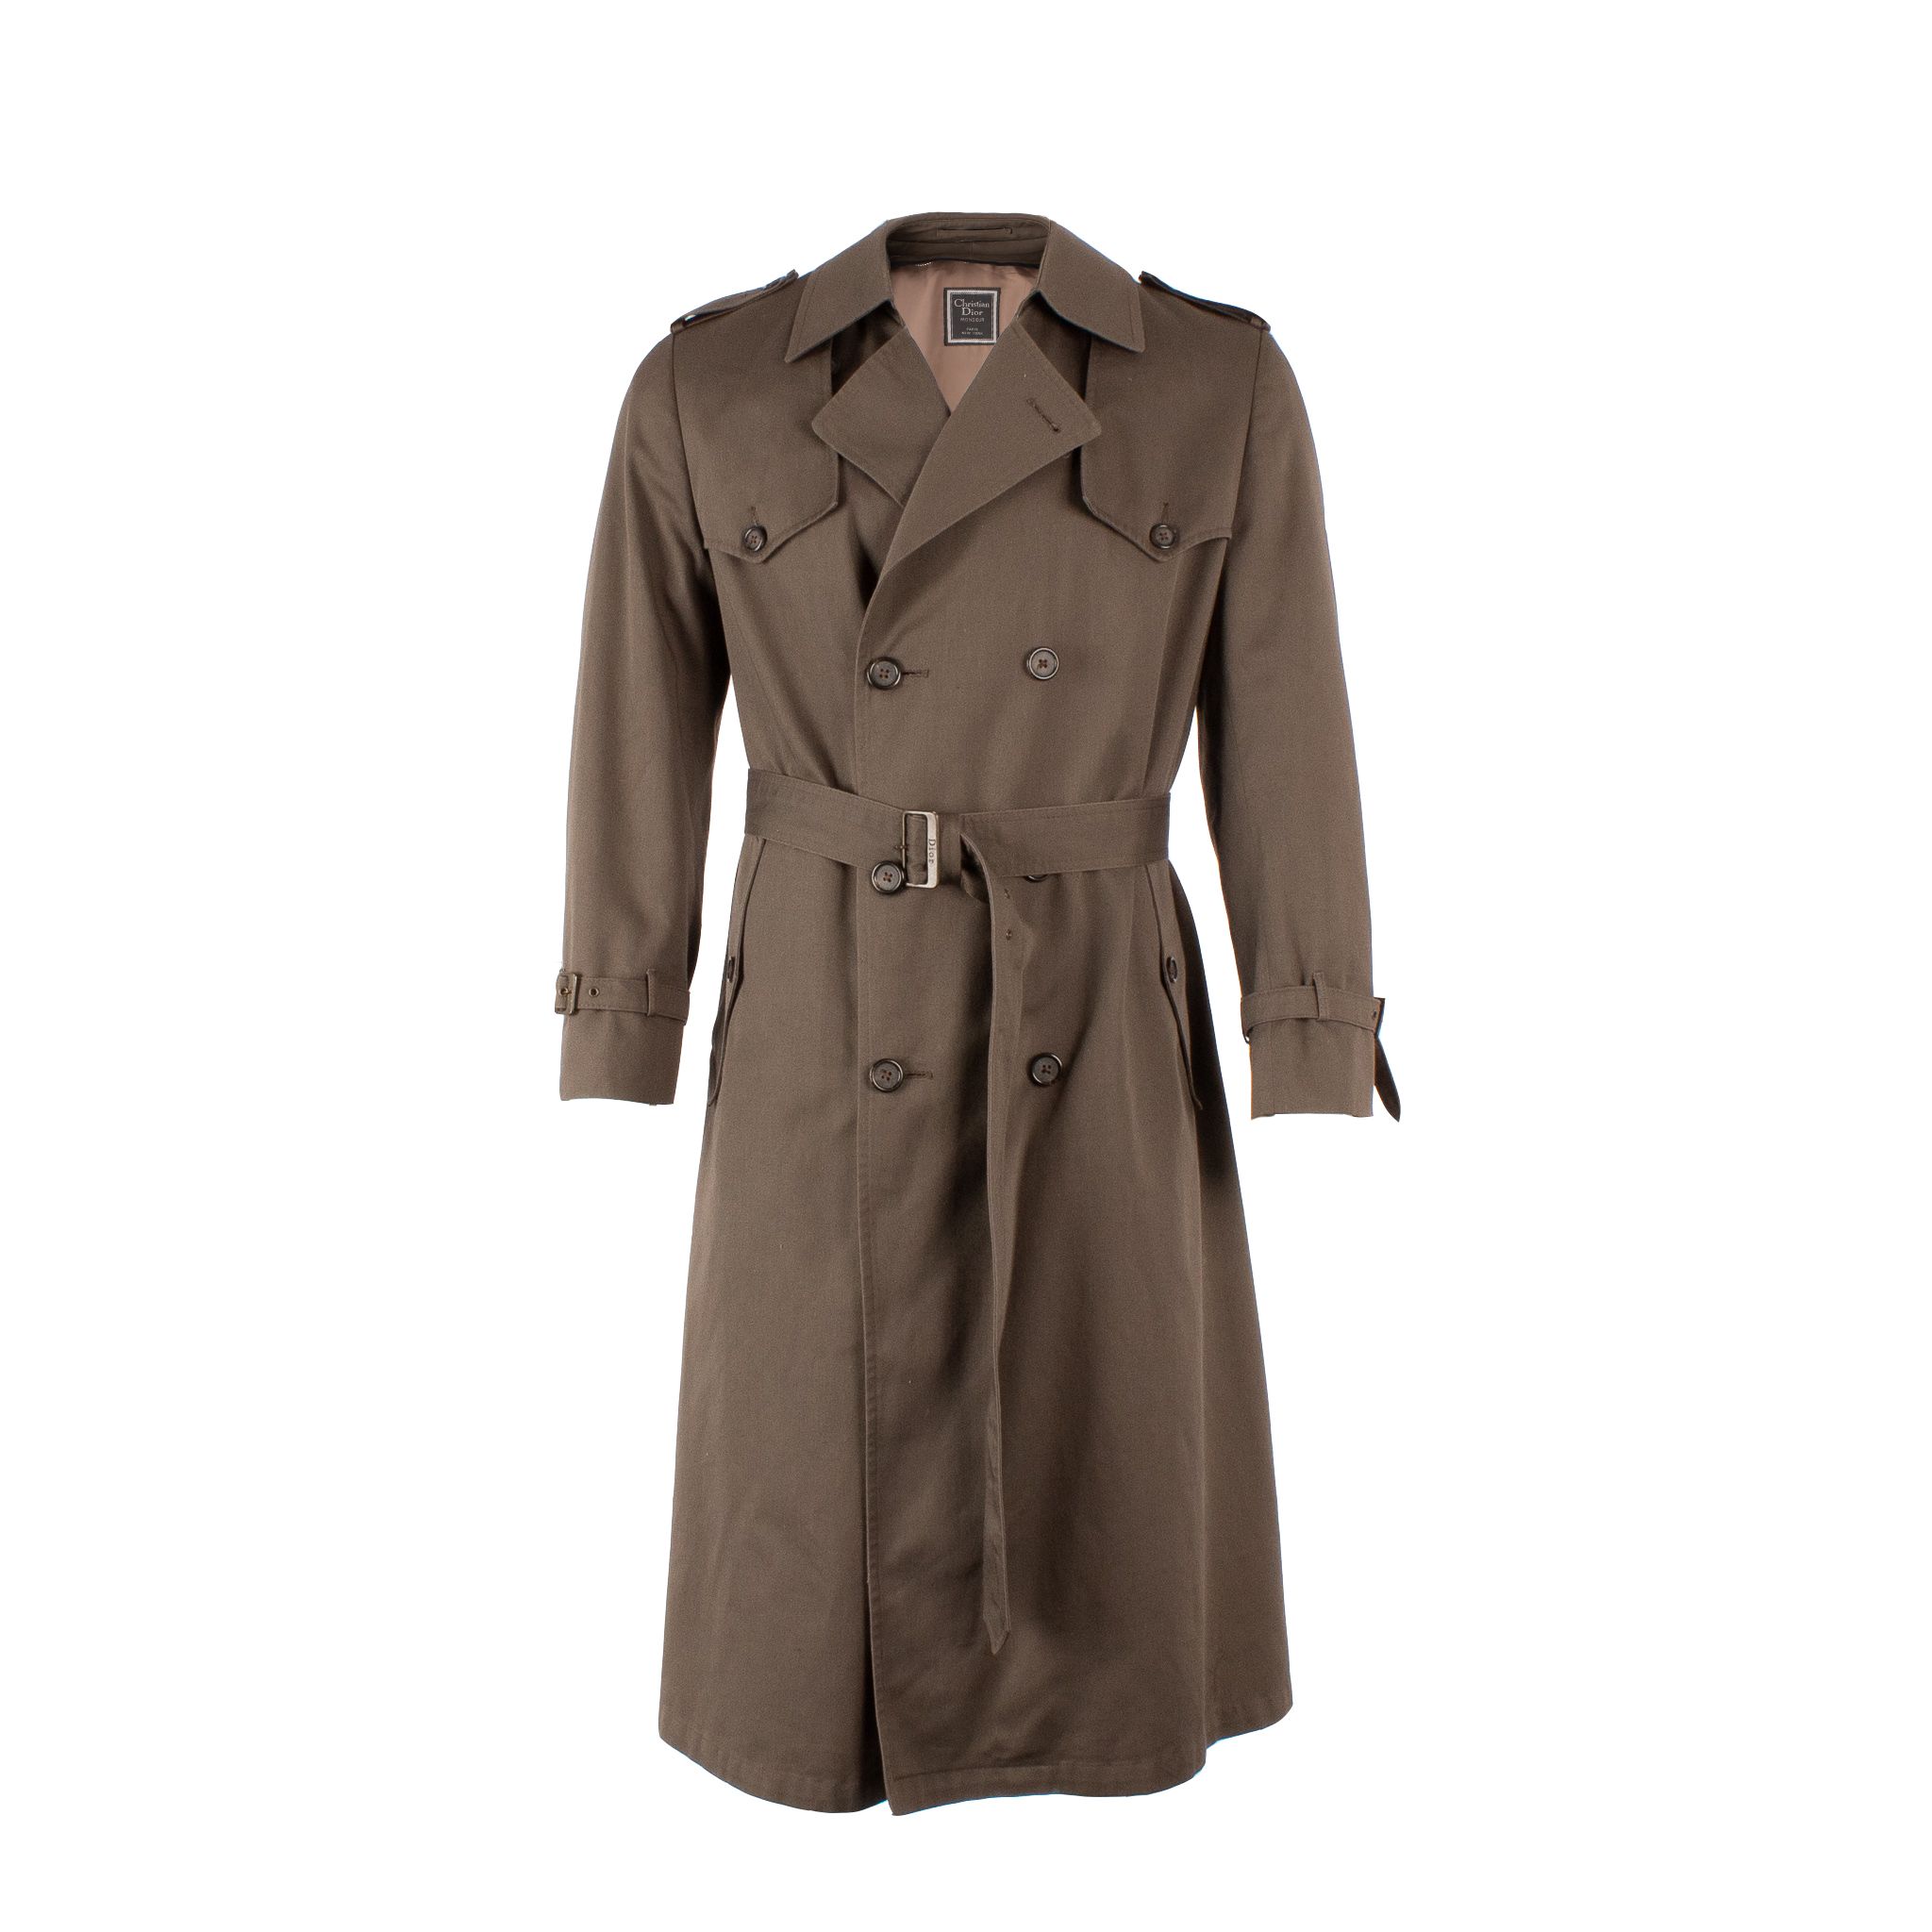 Christian Dior Trench Coat by George Lewis Jr | Basic.Space